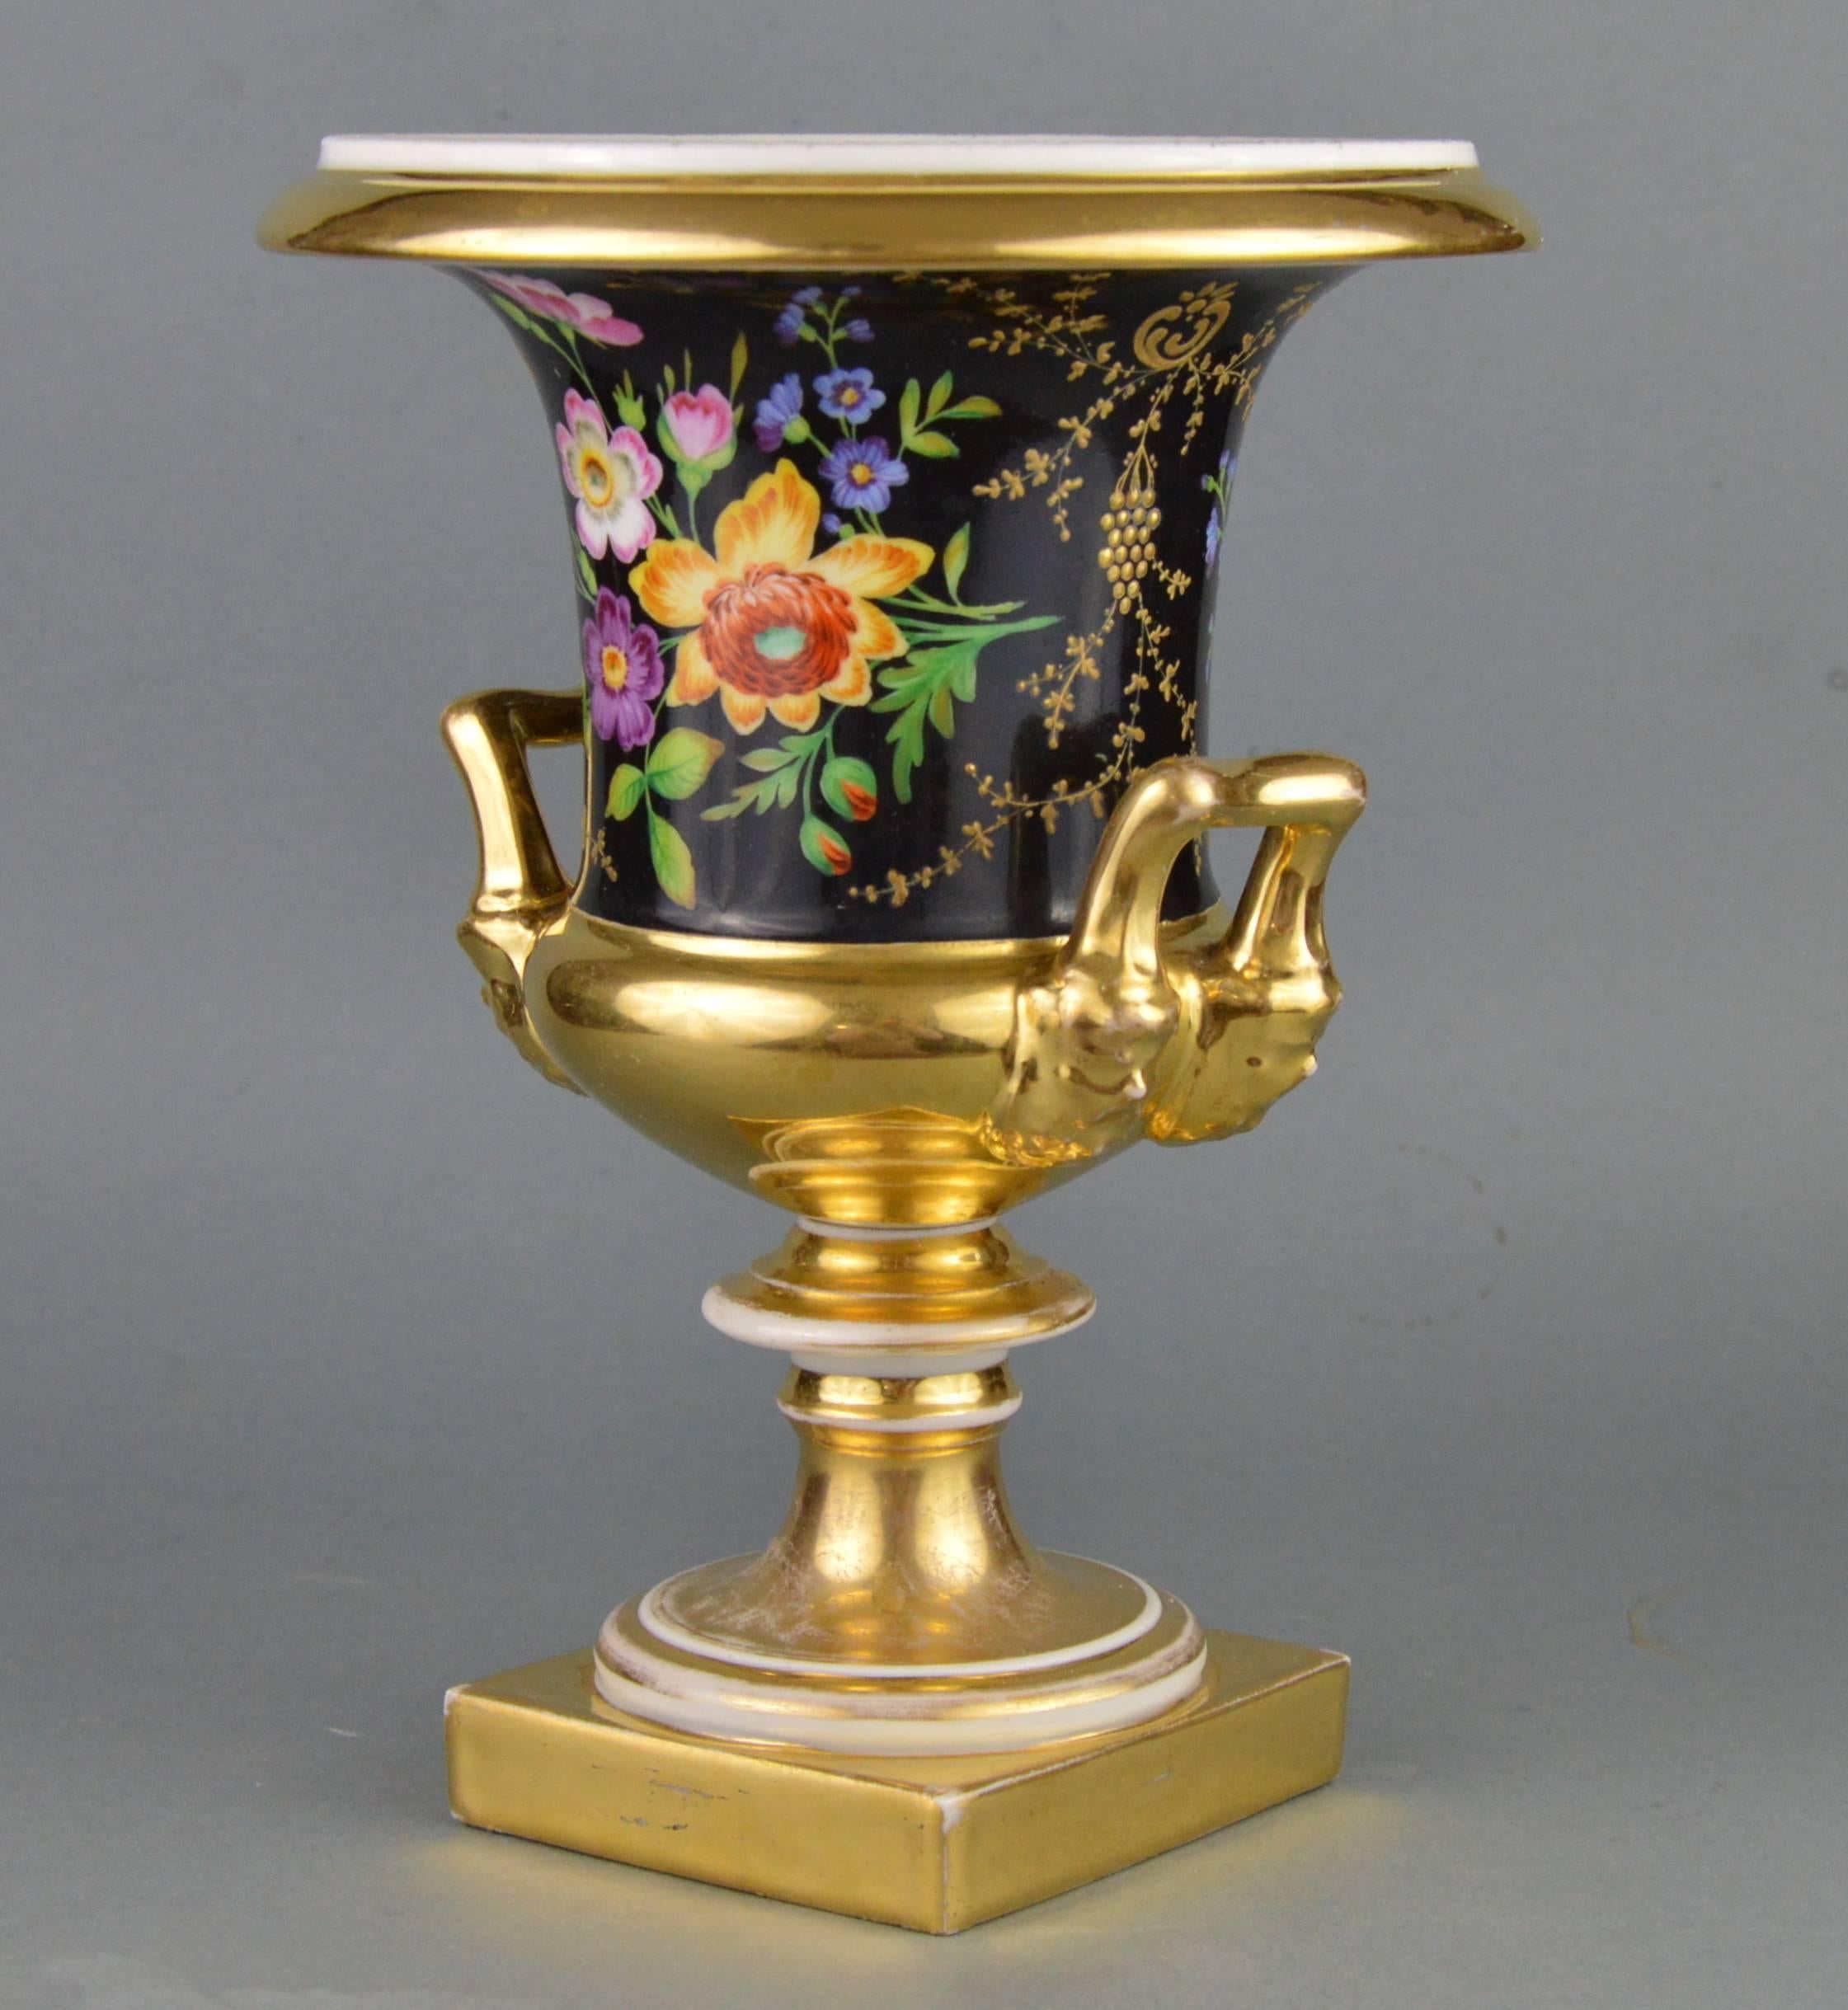 Medici porcelain vase. Fine quality hand-painted flower ornamented decoration on a black background (one of the most complicated colours to handle in porcelain decoration). Satire heads shaped gilt handles. Typical 1820-1840 Jacob Petit romantic